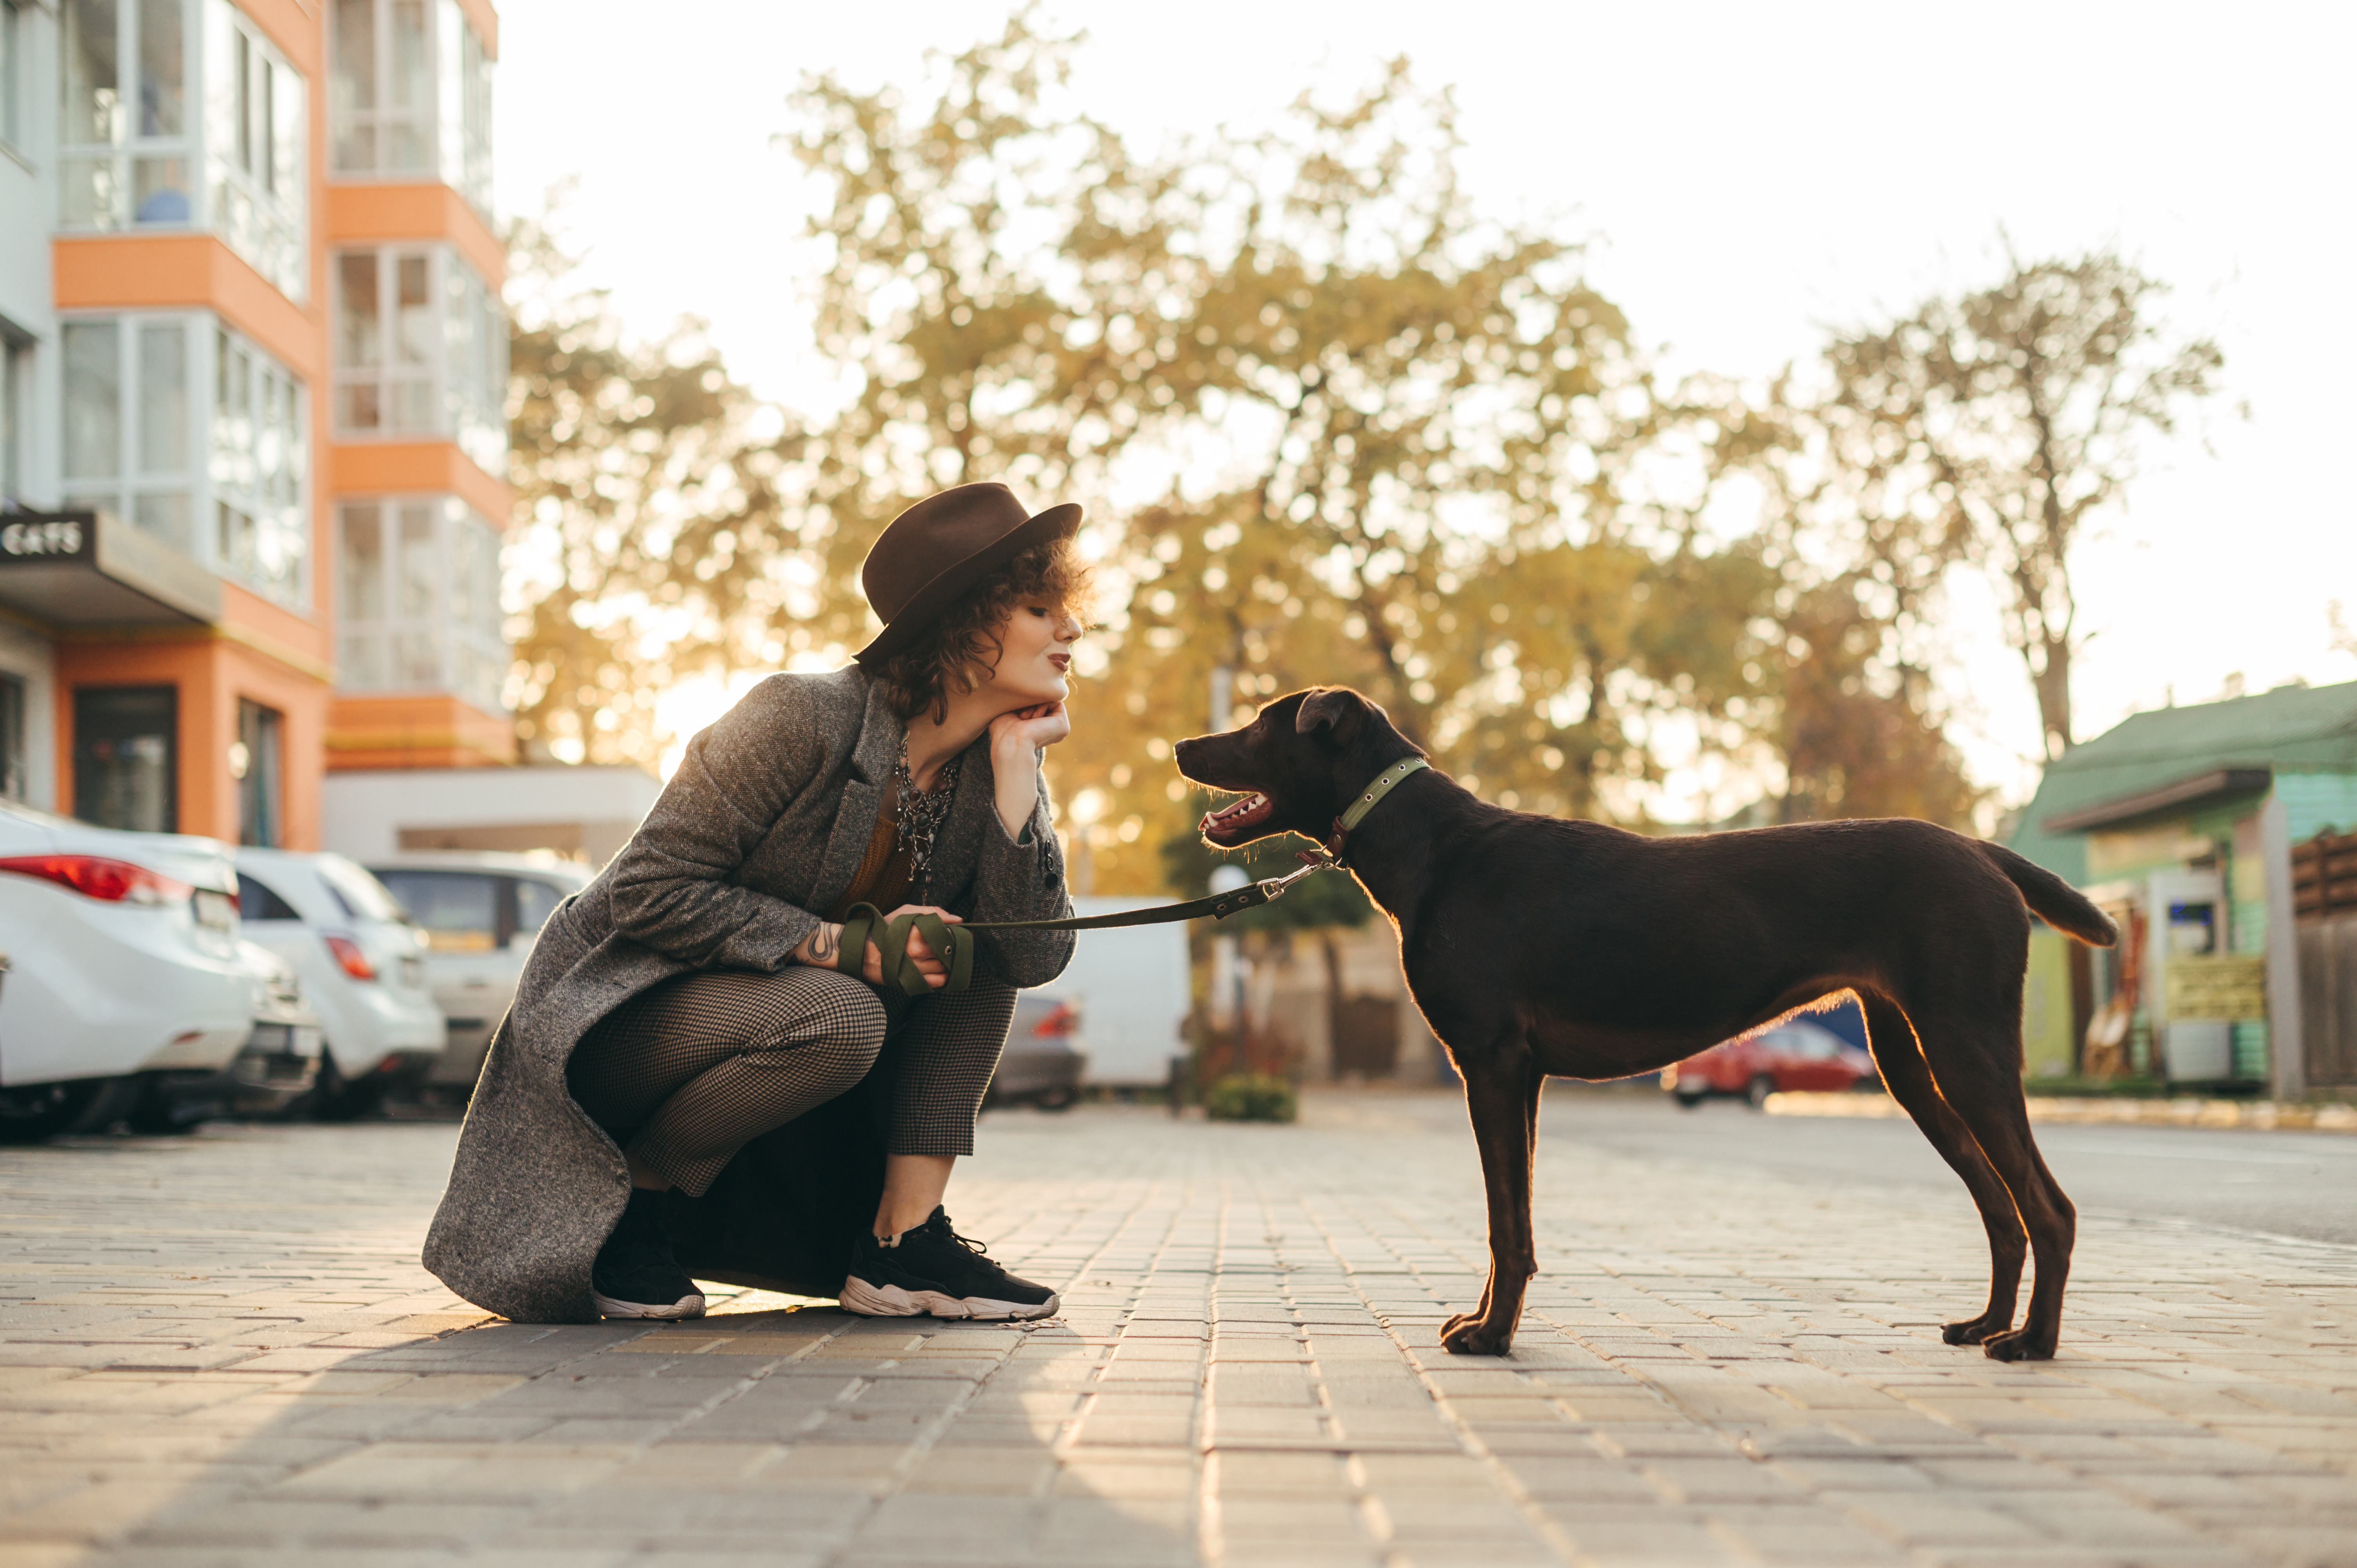 Beautiful girl in stylish clothes and hat playing with dog on street background at sunset. Stylish girl with curly hair sits near a puppy dog and smiles.